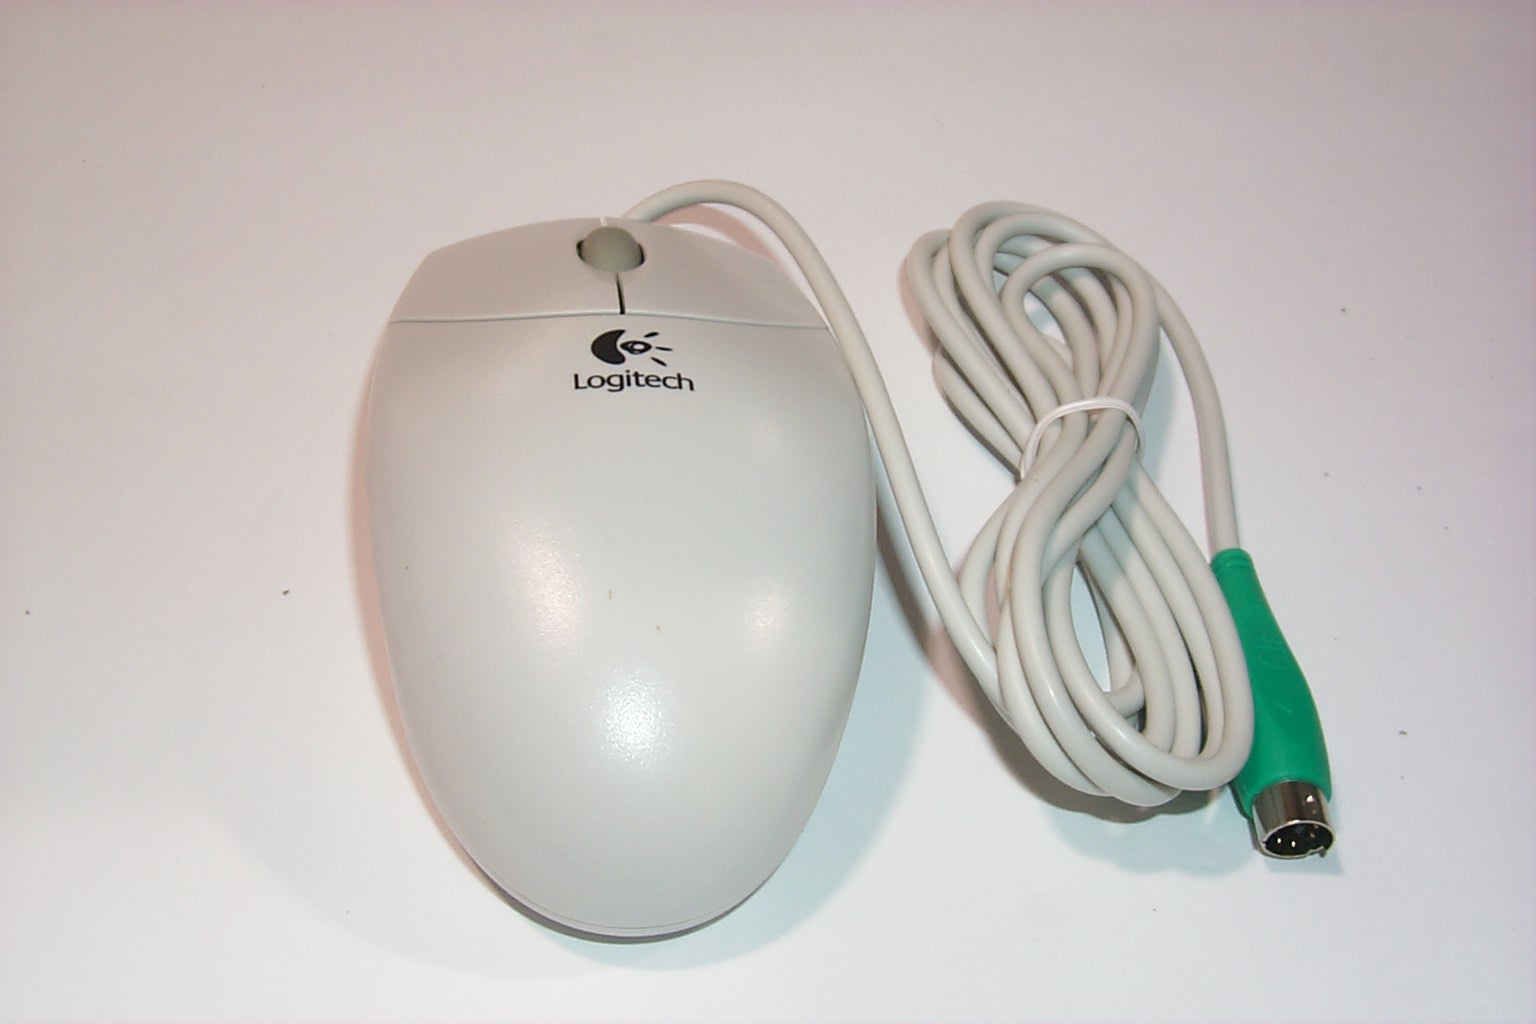 Milwaukee PC - Logitech First Mouse - PS/2 w/scroll